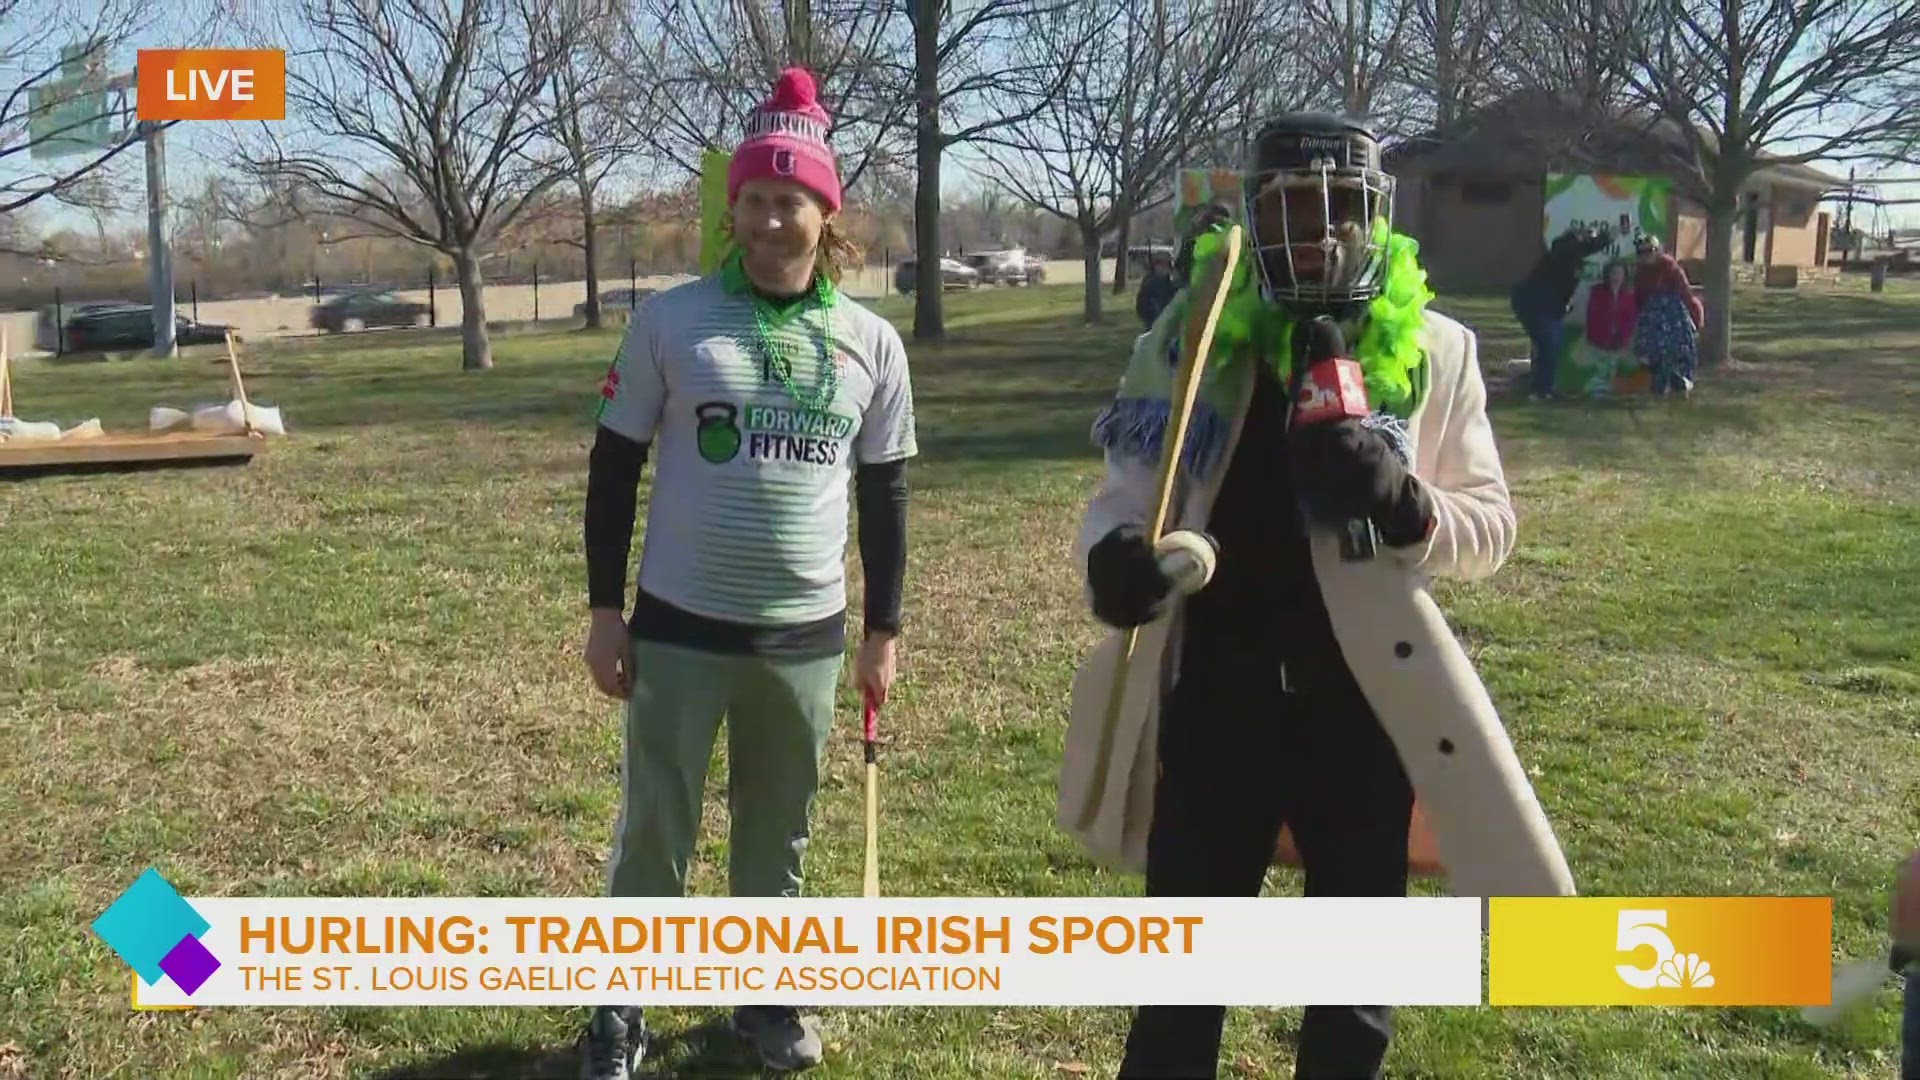 The St. Louis Gaelic Athletic Association promotes a player-centric environment that develops Irish sports and preserves Irish cultural heritage in the greater St.